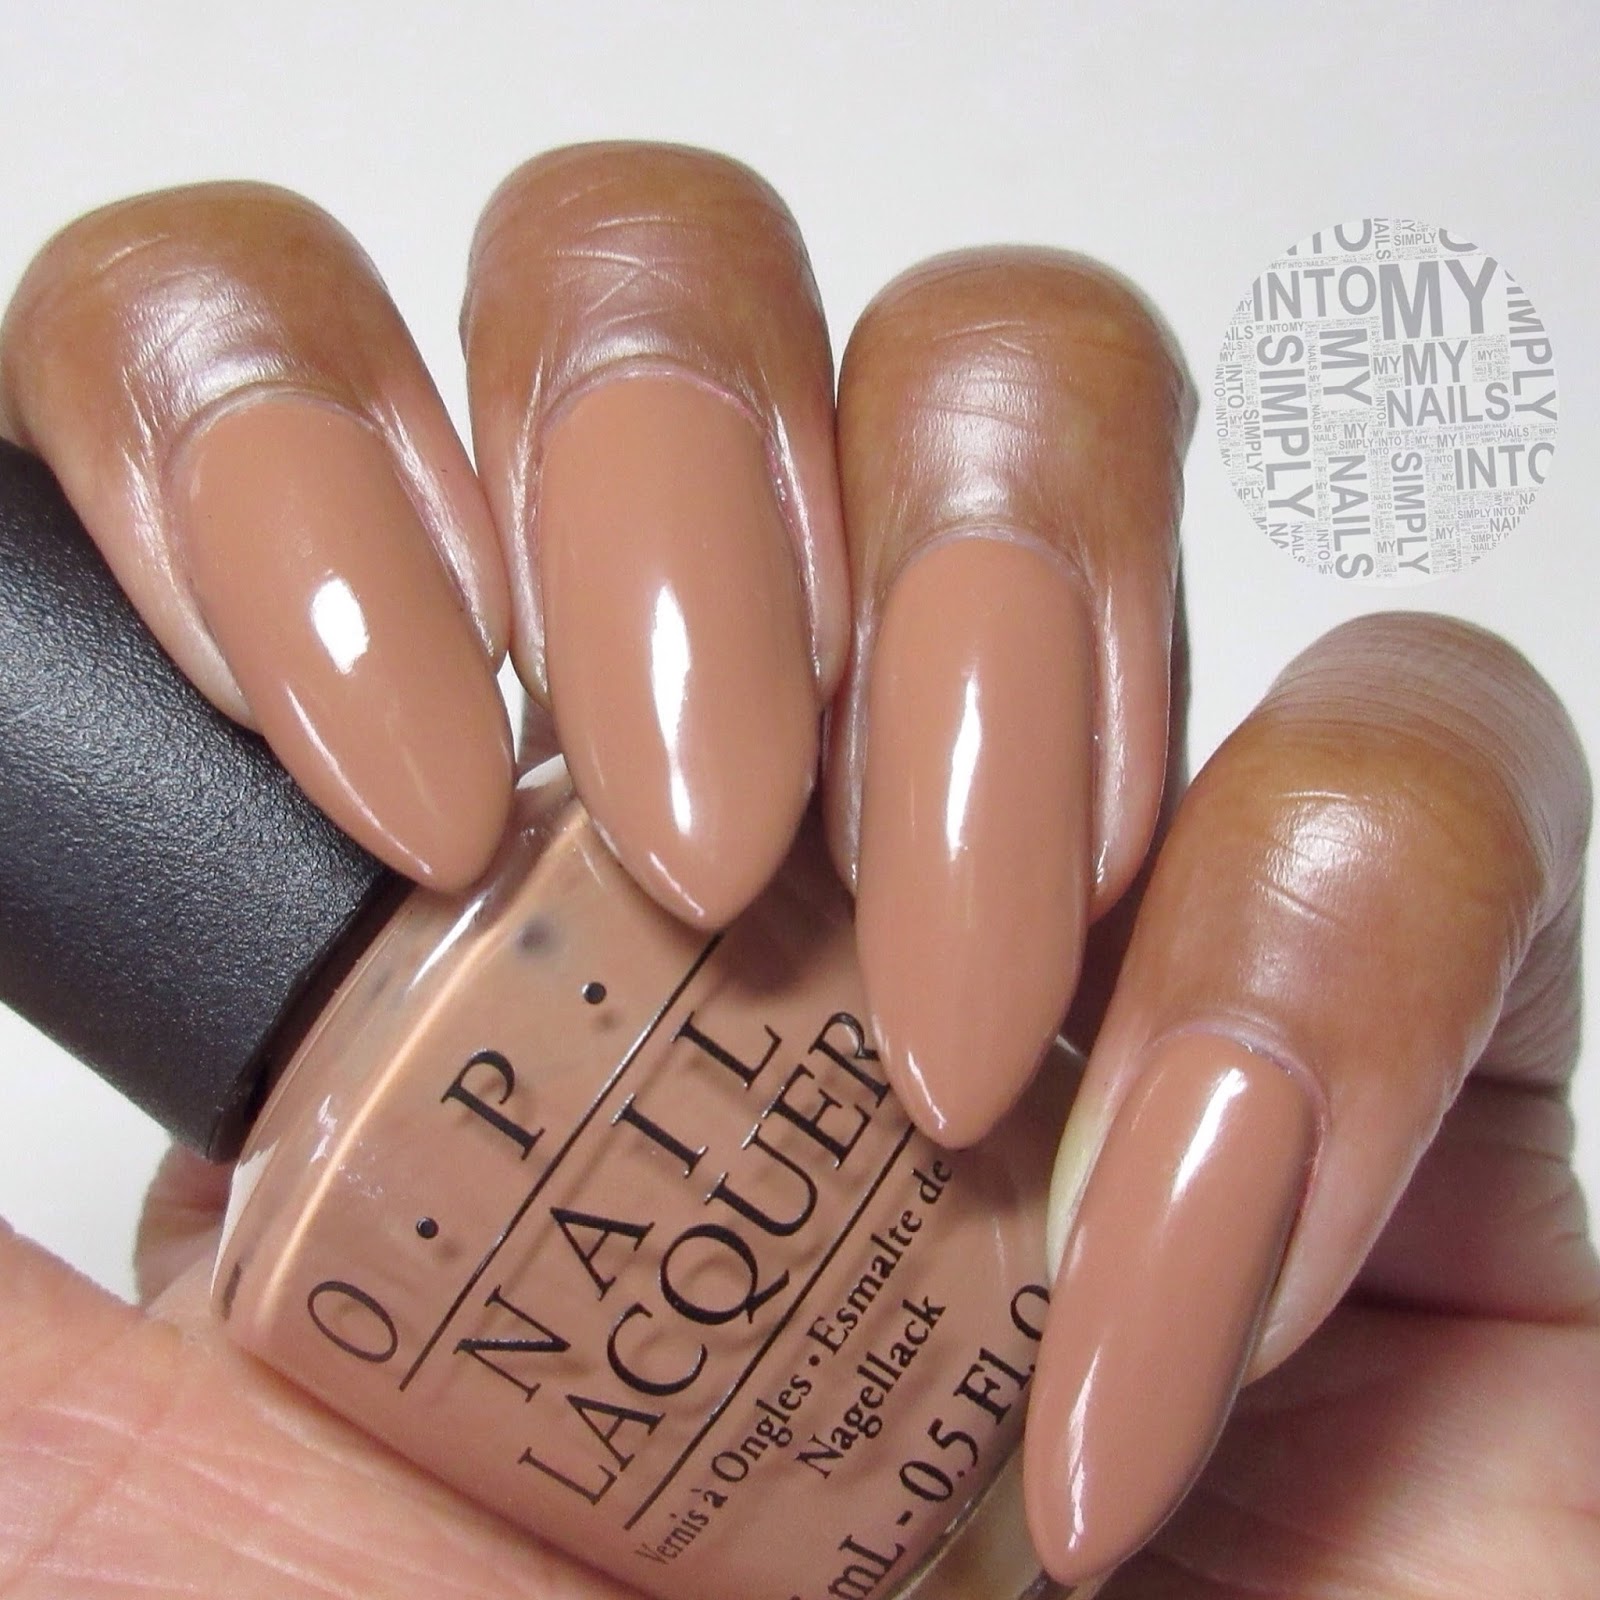 OPI Nail Polish in Every Month is Oktoberfest - Swatches and Review